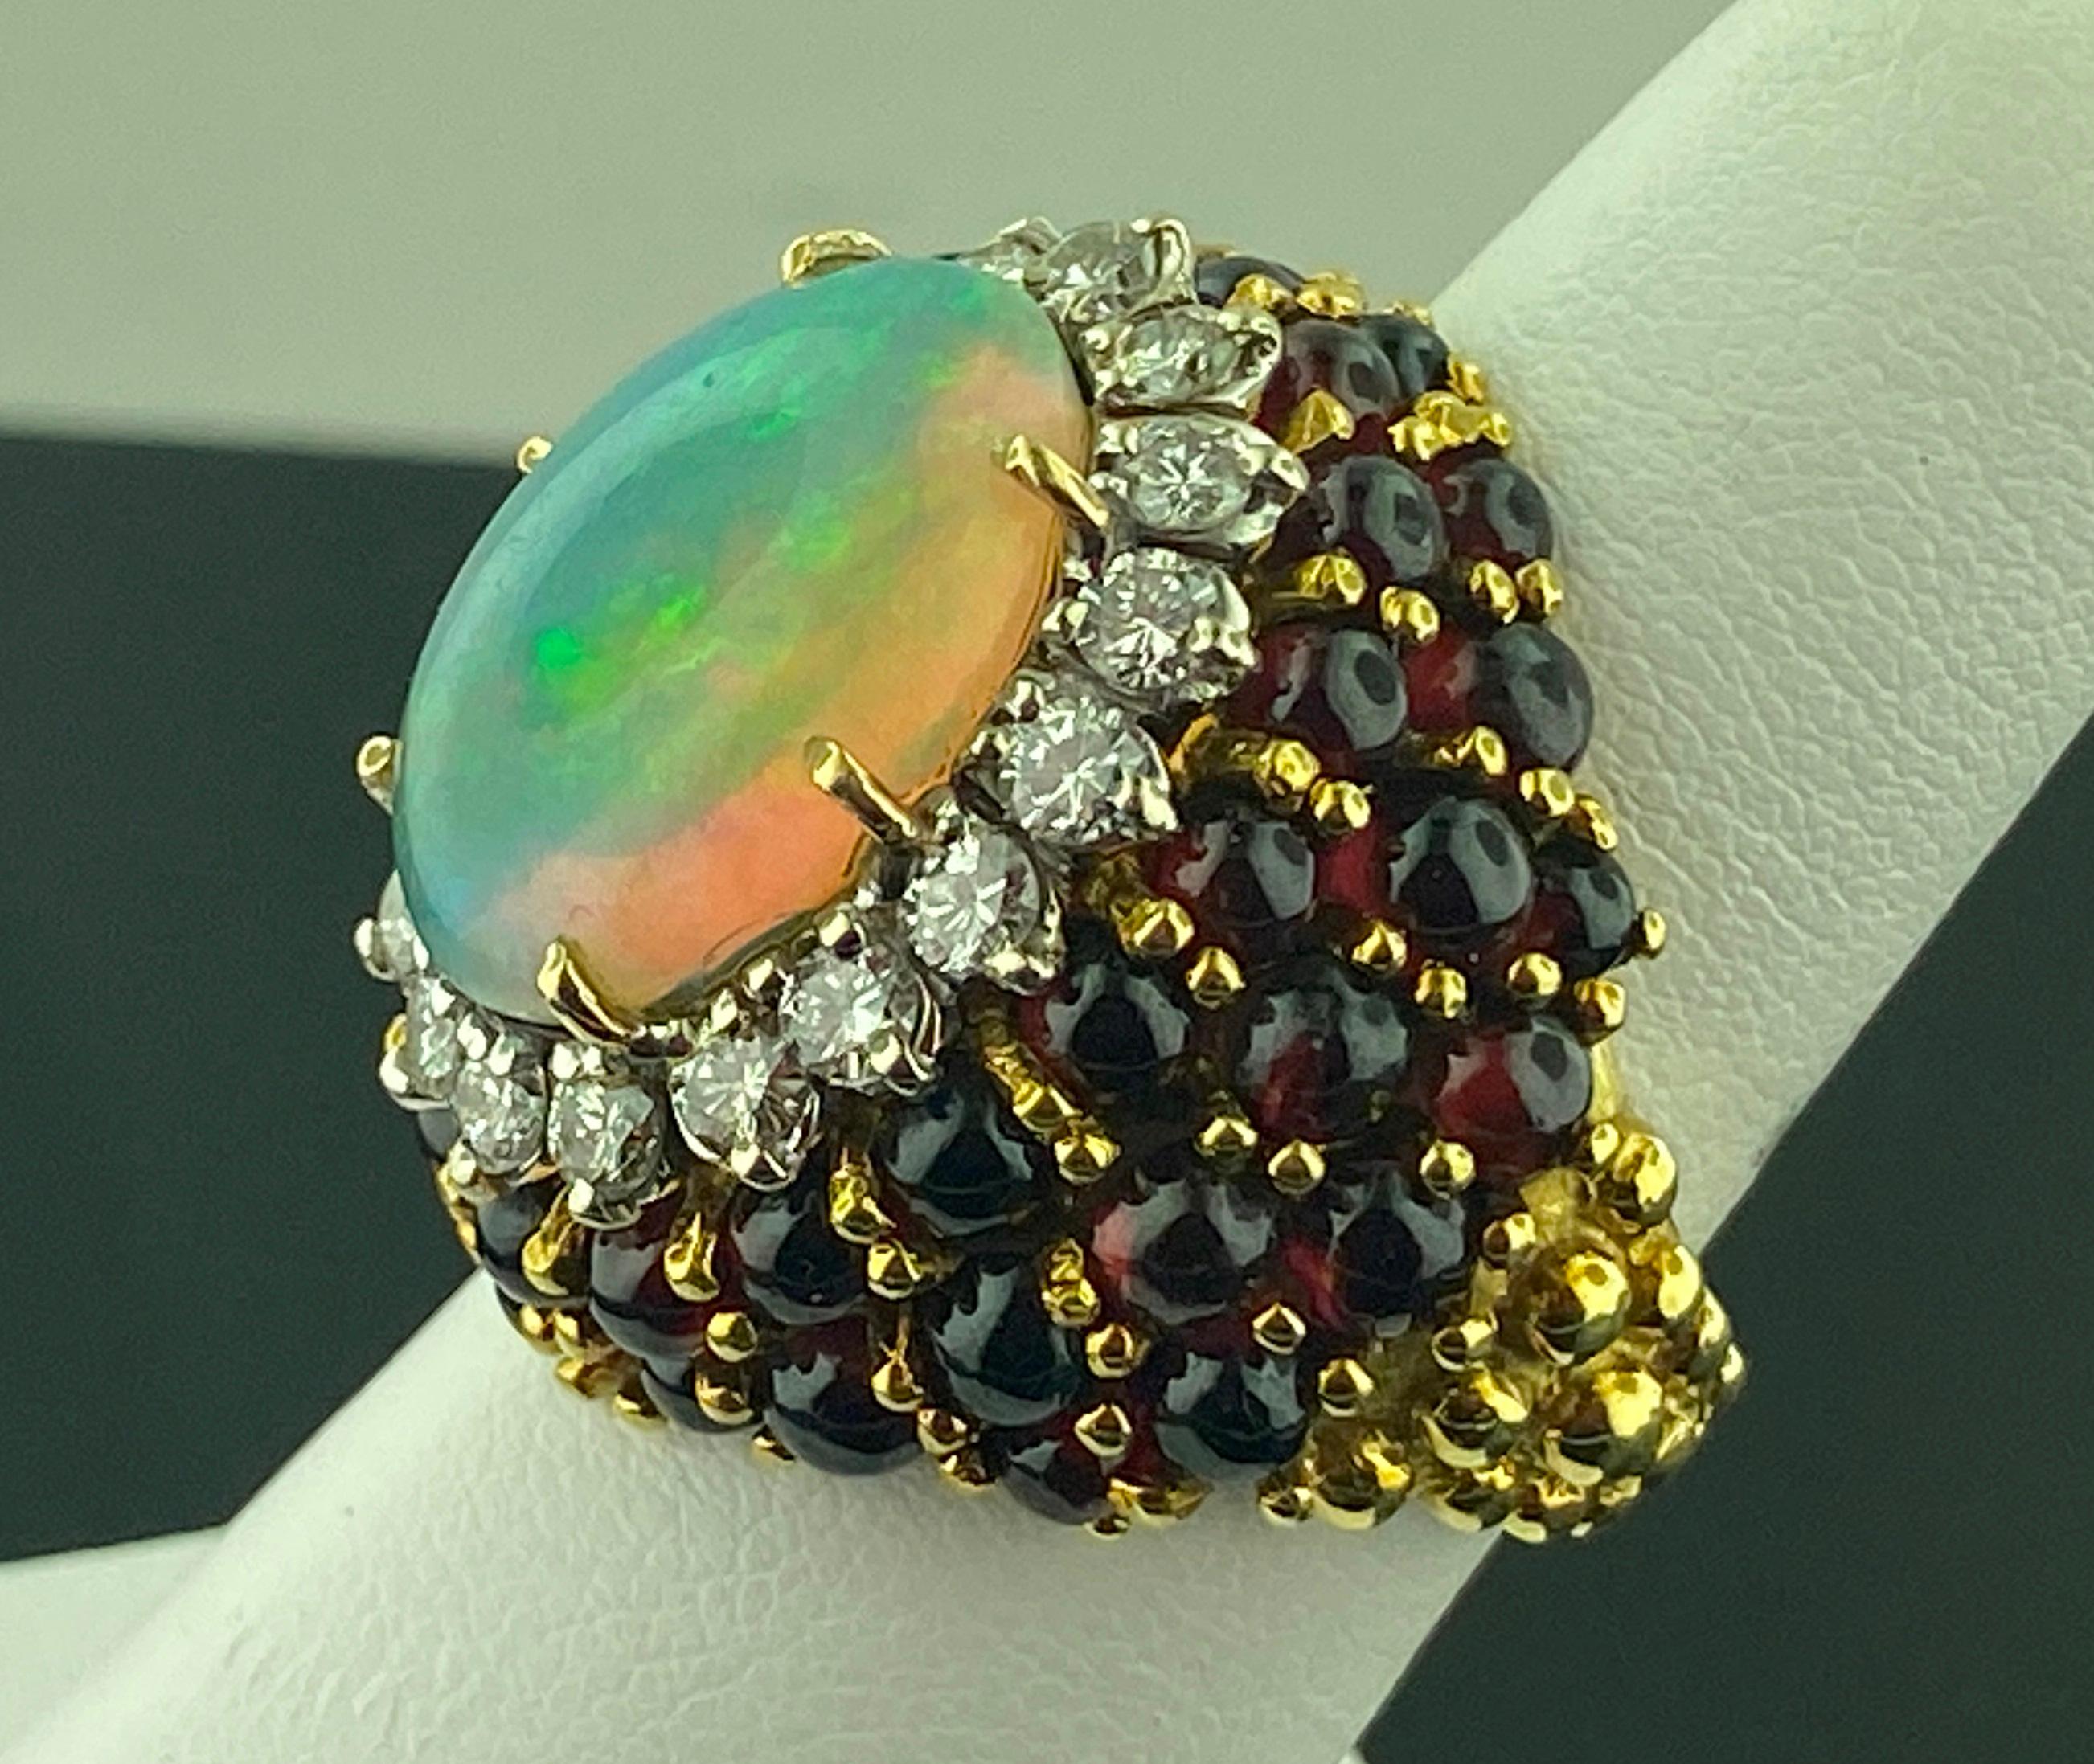 Set in 14 karat yellow gold, weighing 23 grams, is a 7 carat Oval Cut Cabochon Opal with 18 Round Brilliant Cut diamonds weighing 1.25 carats, Color Grade of: G-H, Clarity Grade of: VS plus numerous Garnet beads.  Ring size is 8.25.